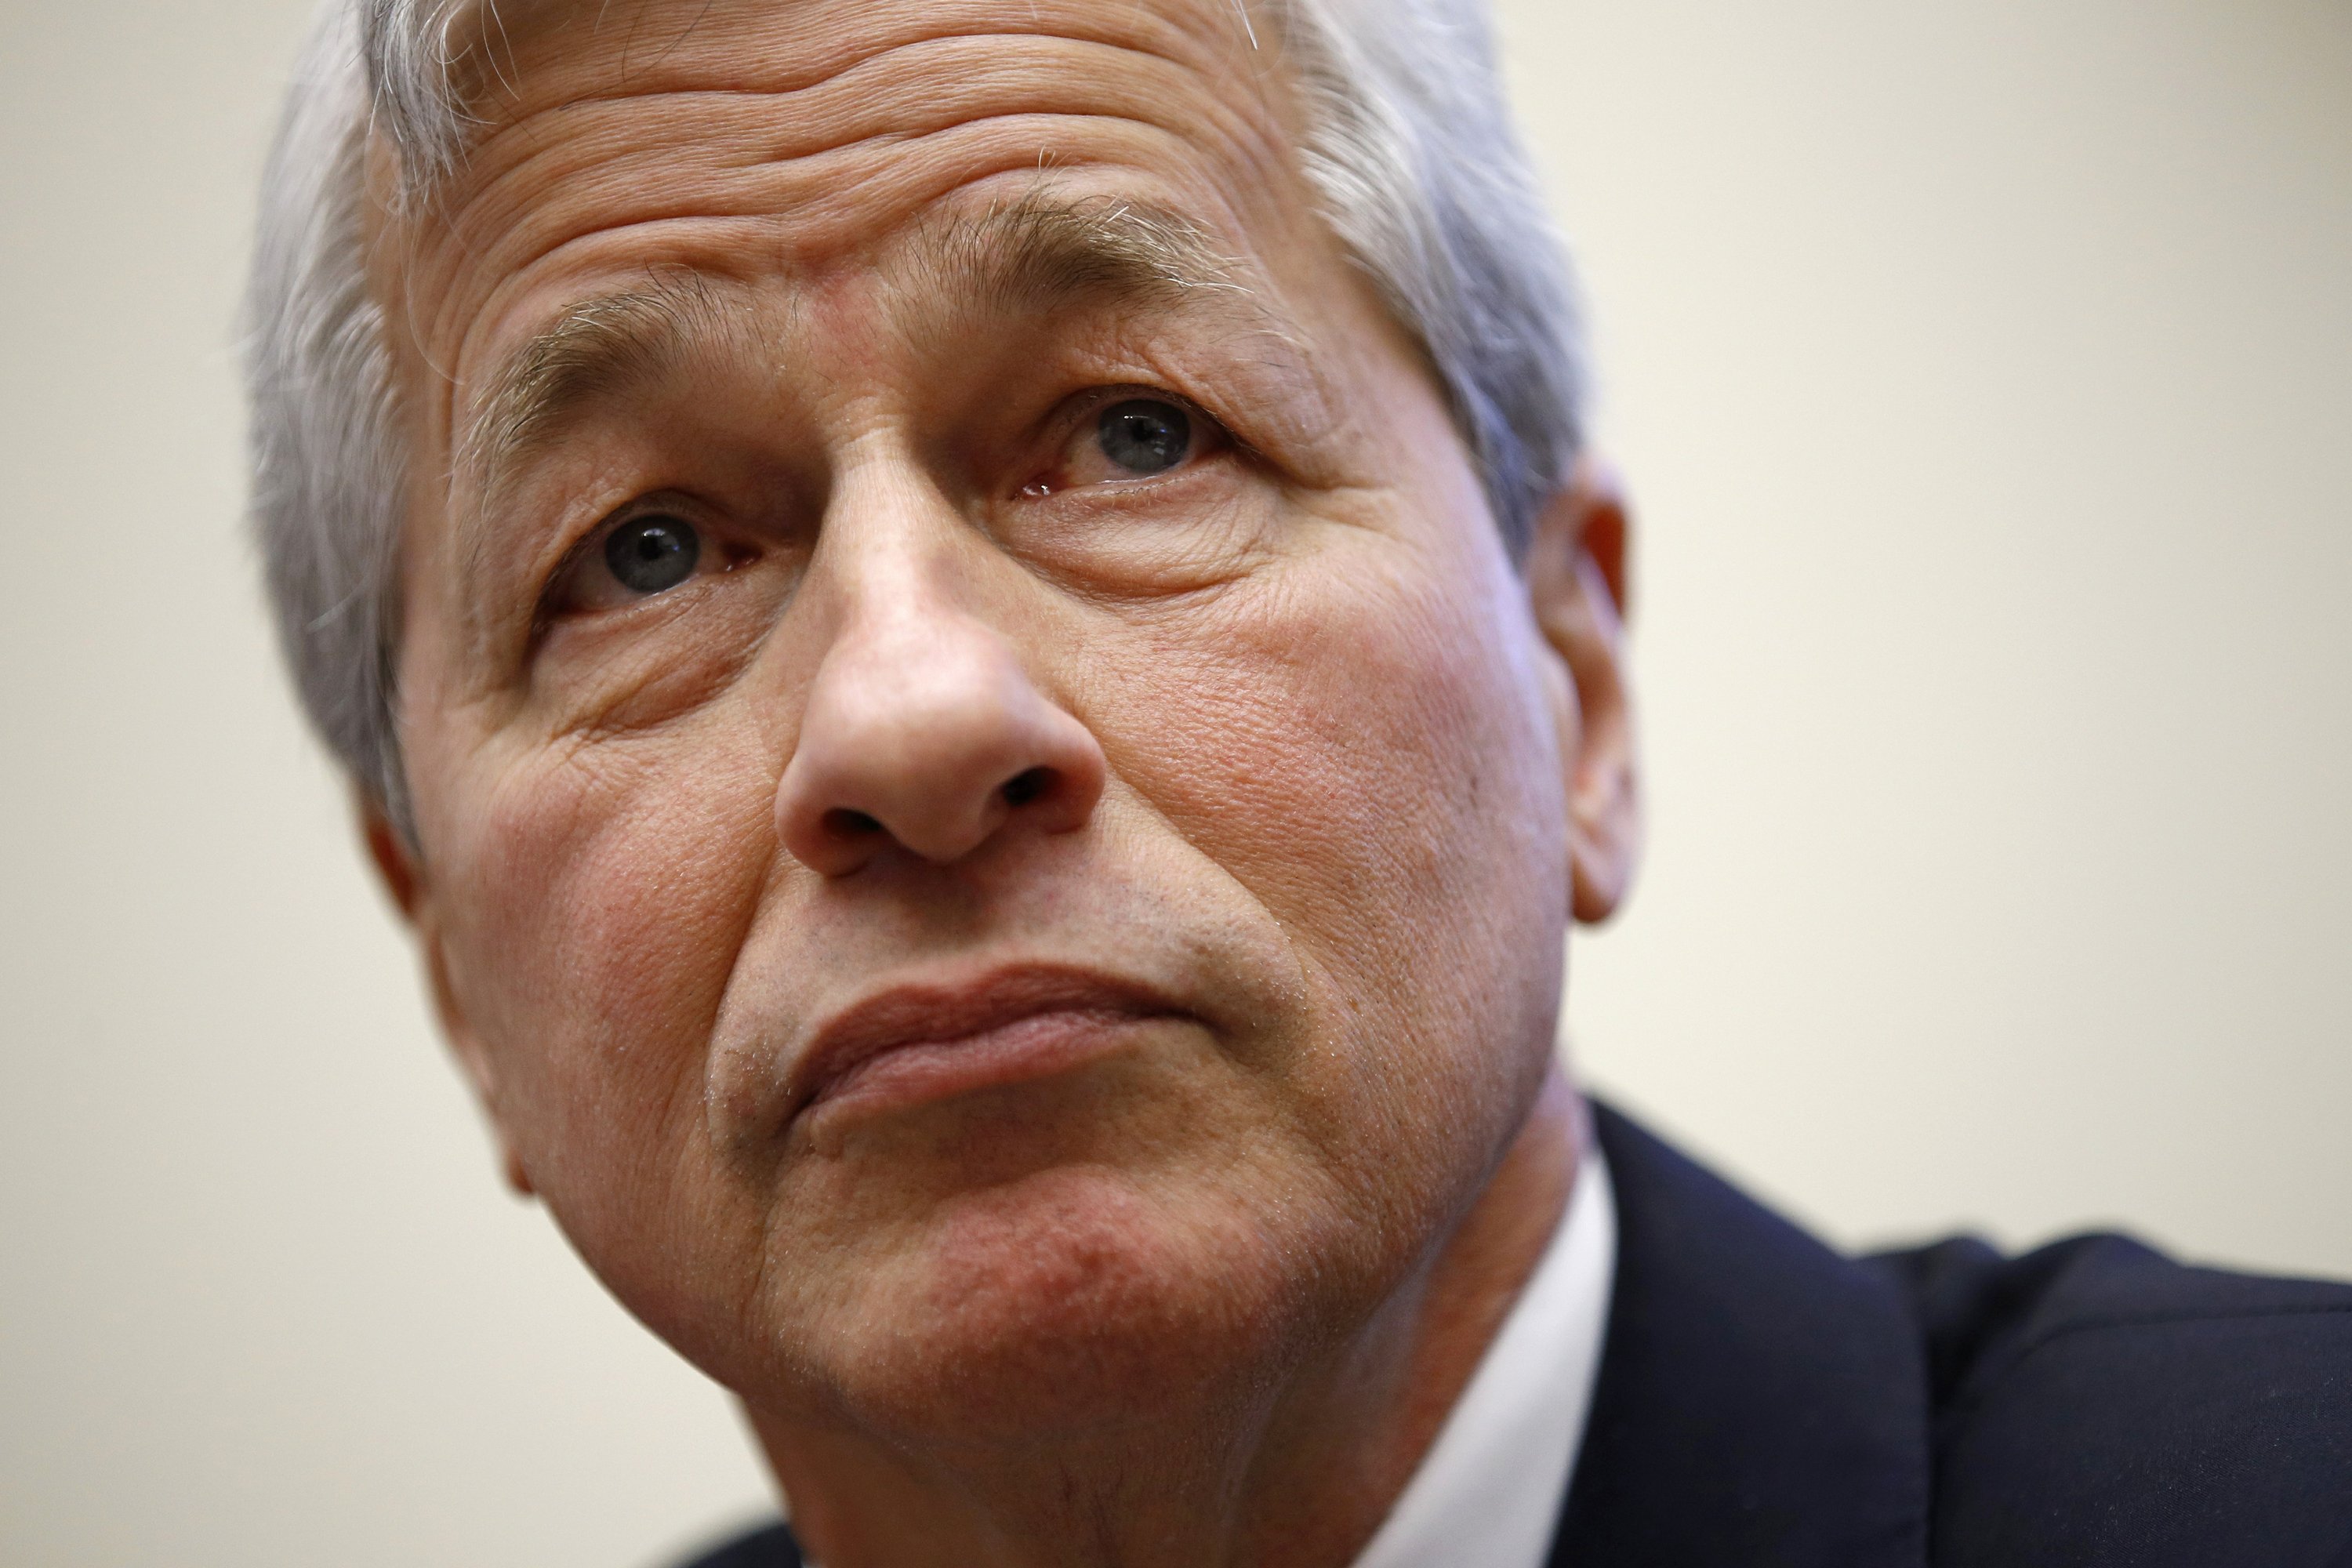 CEO Dimon has emergency heart surgery, recovering AP News